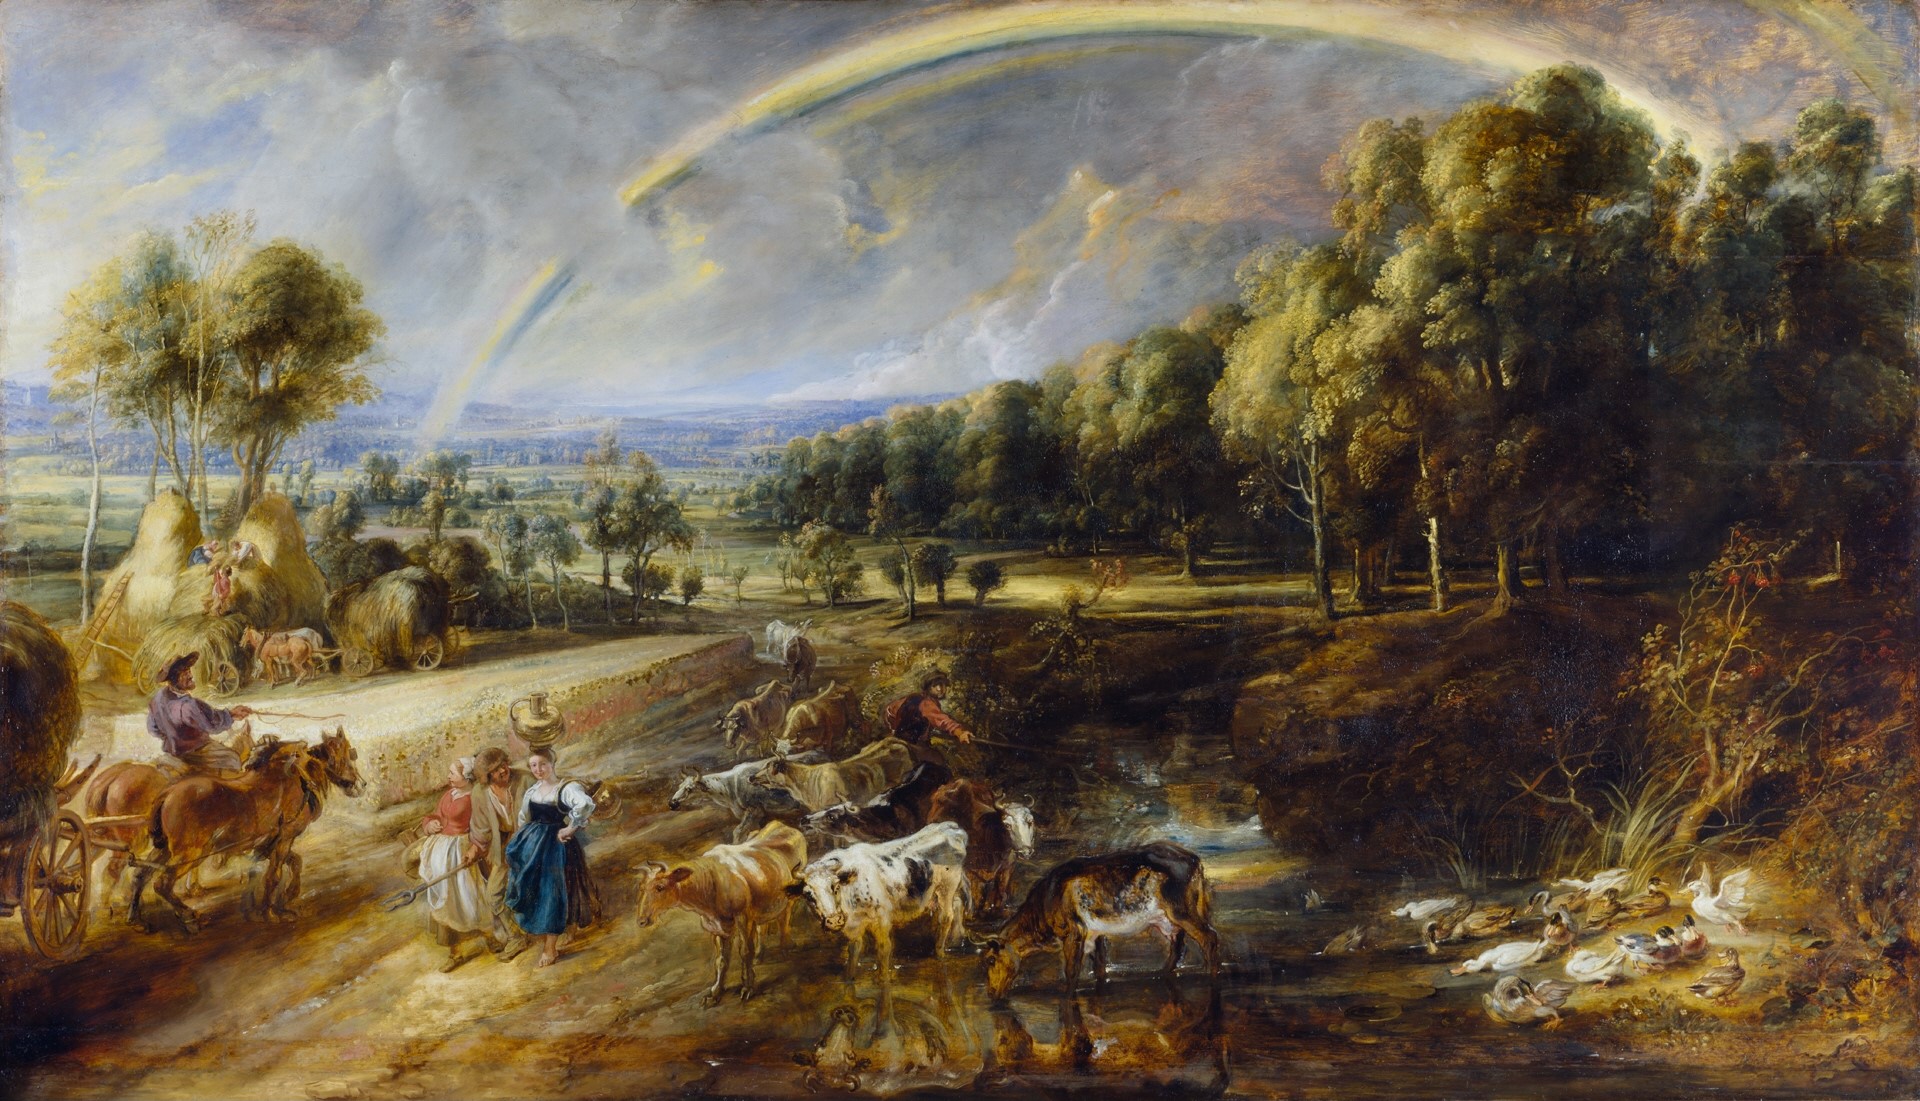 General 1920x1101 Peter Paul Rubens Oil on canvas oil painting painting landscape sky clouds trees animals people rainbows